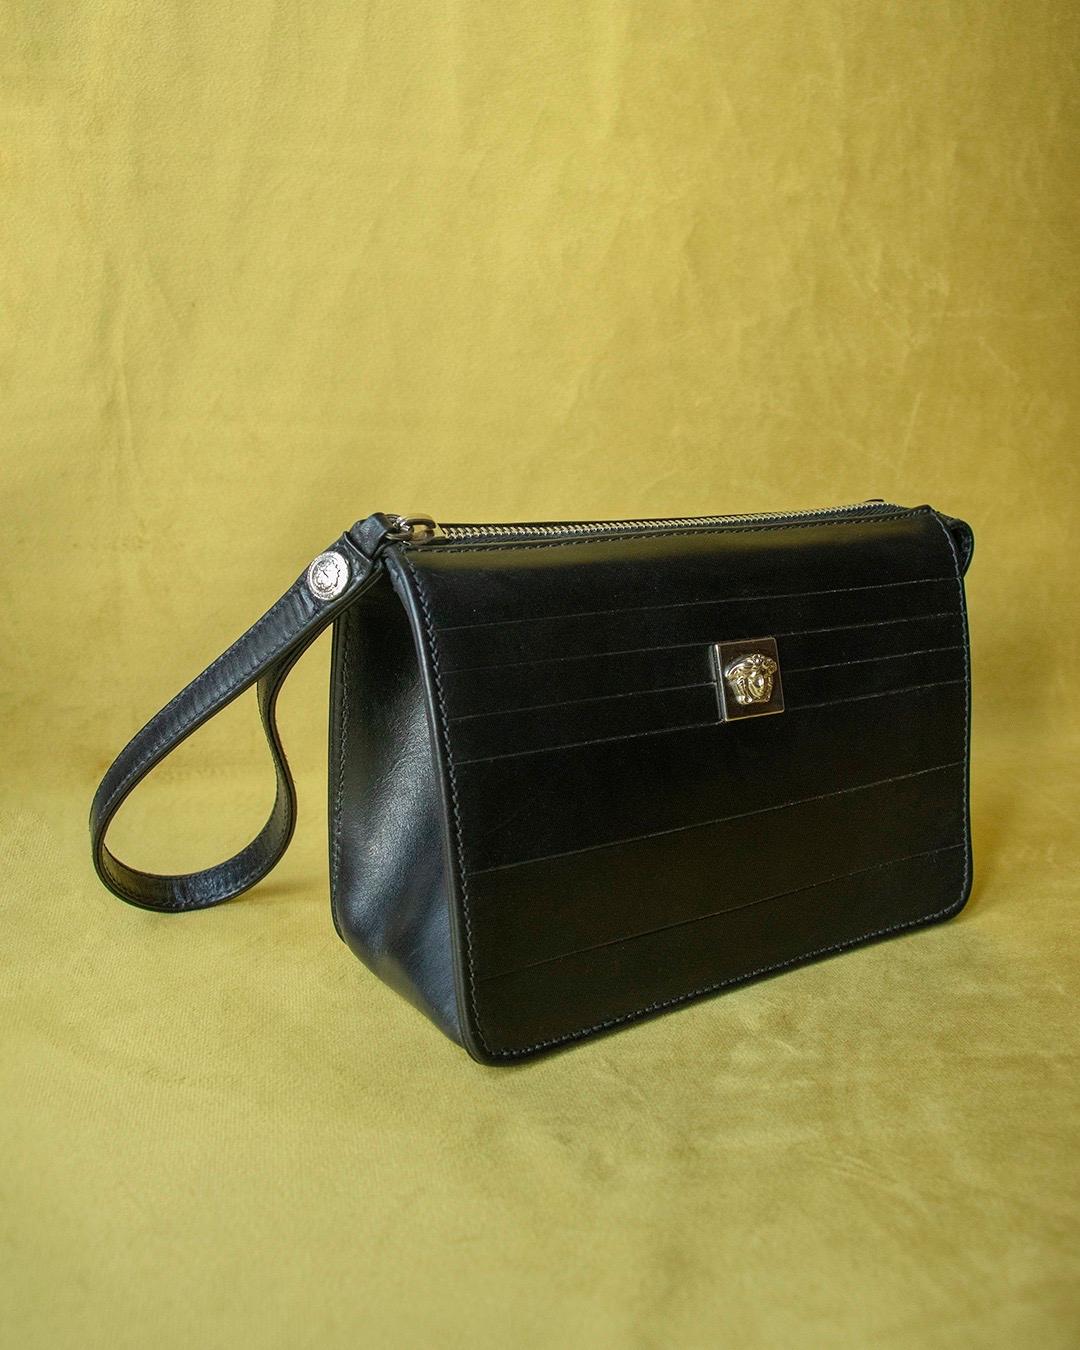 Pochette Gianni Versace.
In black leather, silver hardware
Vintage bag to carry on the wrist or by hand.
Leather interior.
13 cm high
18 cm wide
7 cm deep
Excellent general condition, it shows signs of normal use.
A few small marks on the skin,